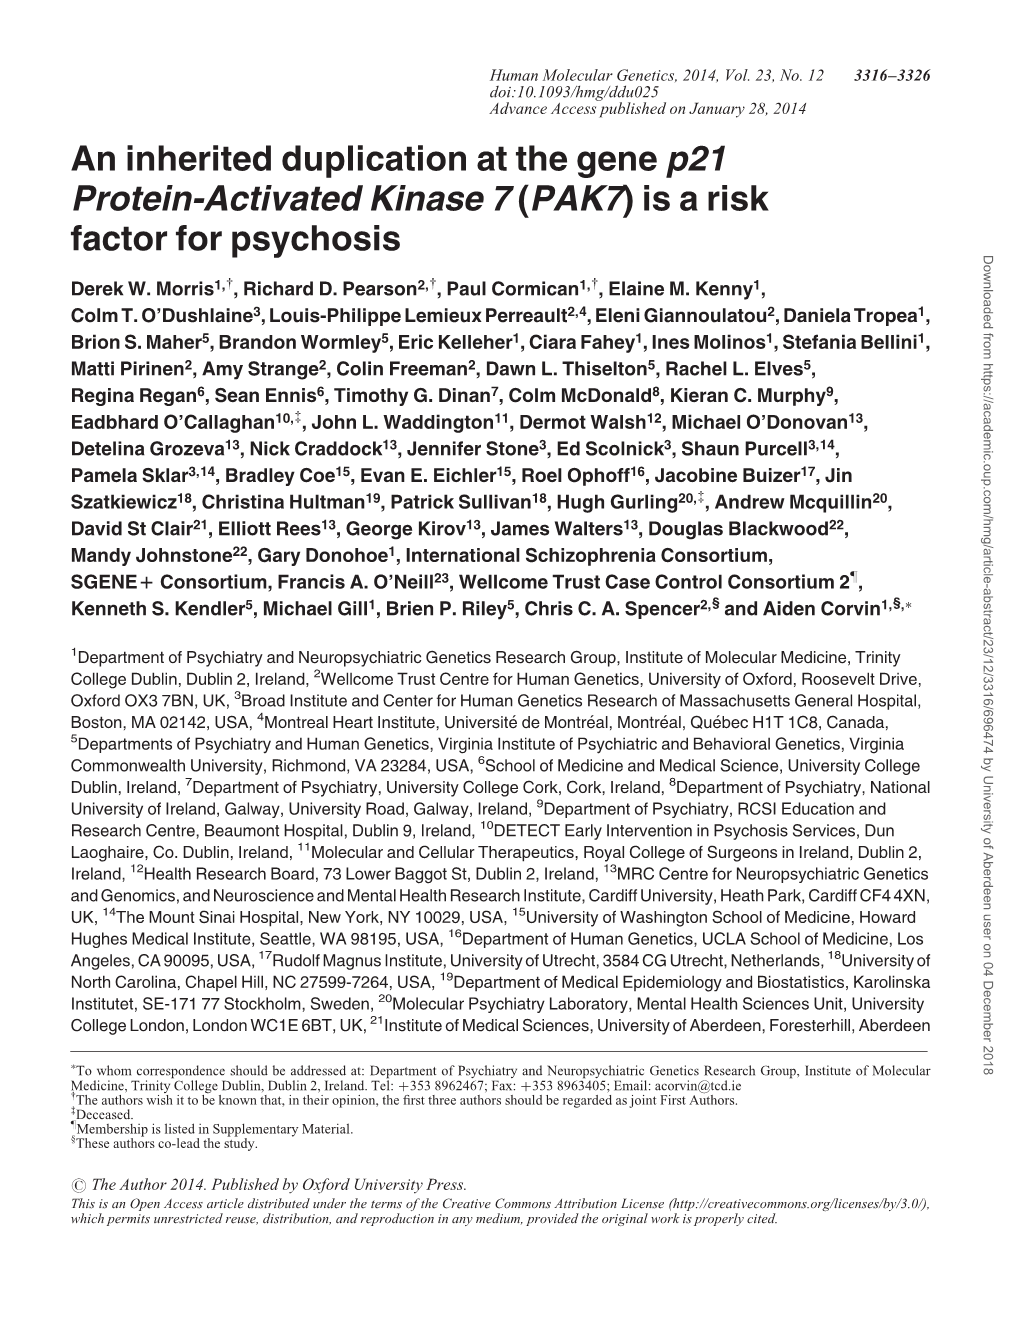 An Inherited Duplication at the Gene P21 Protein-Activated Kinase 7 (PAK7) Is a Risk